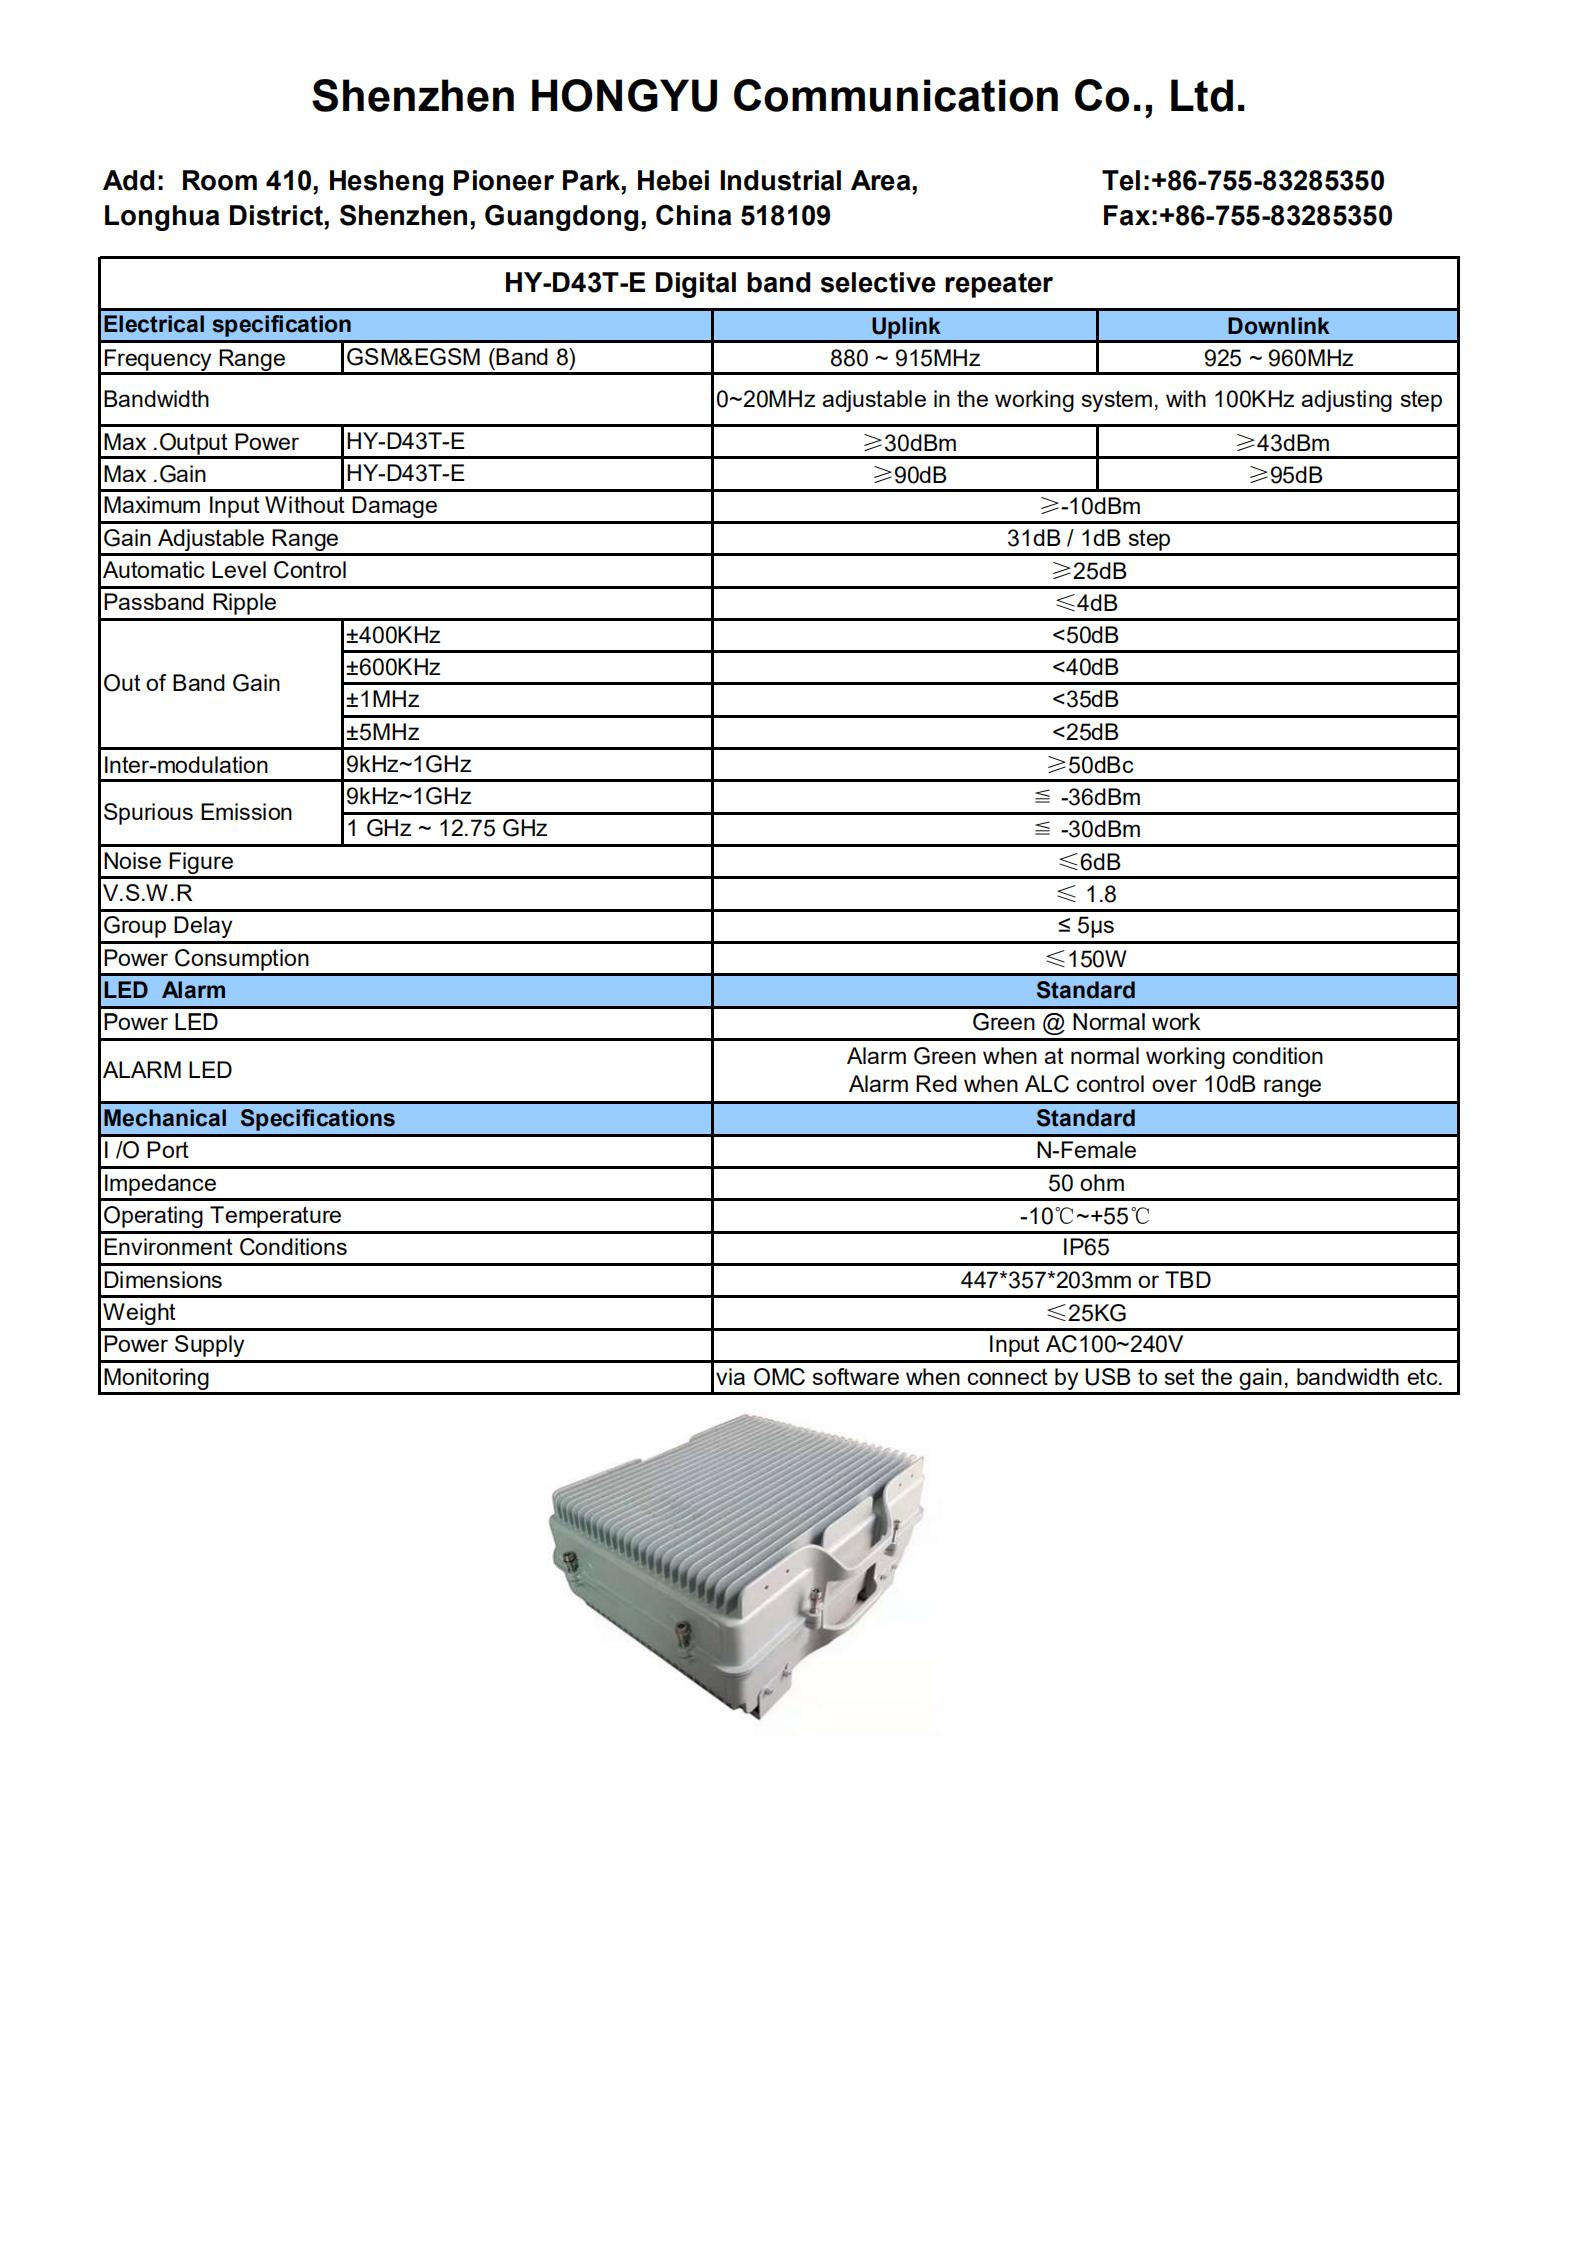 HY-D43T-E Digital Repeater Specifications_00.jpg